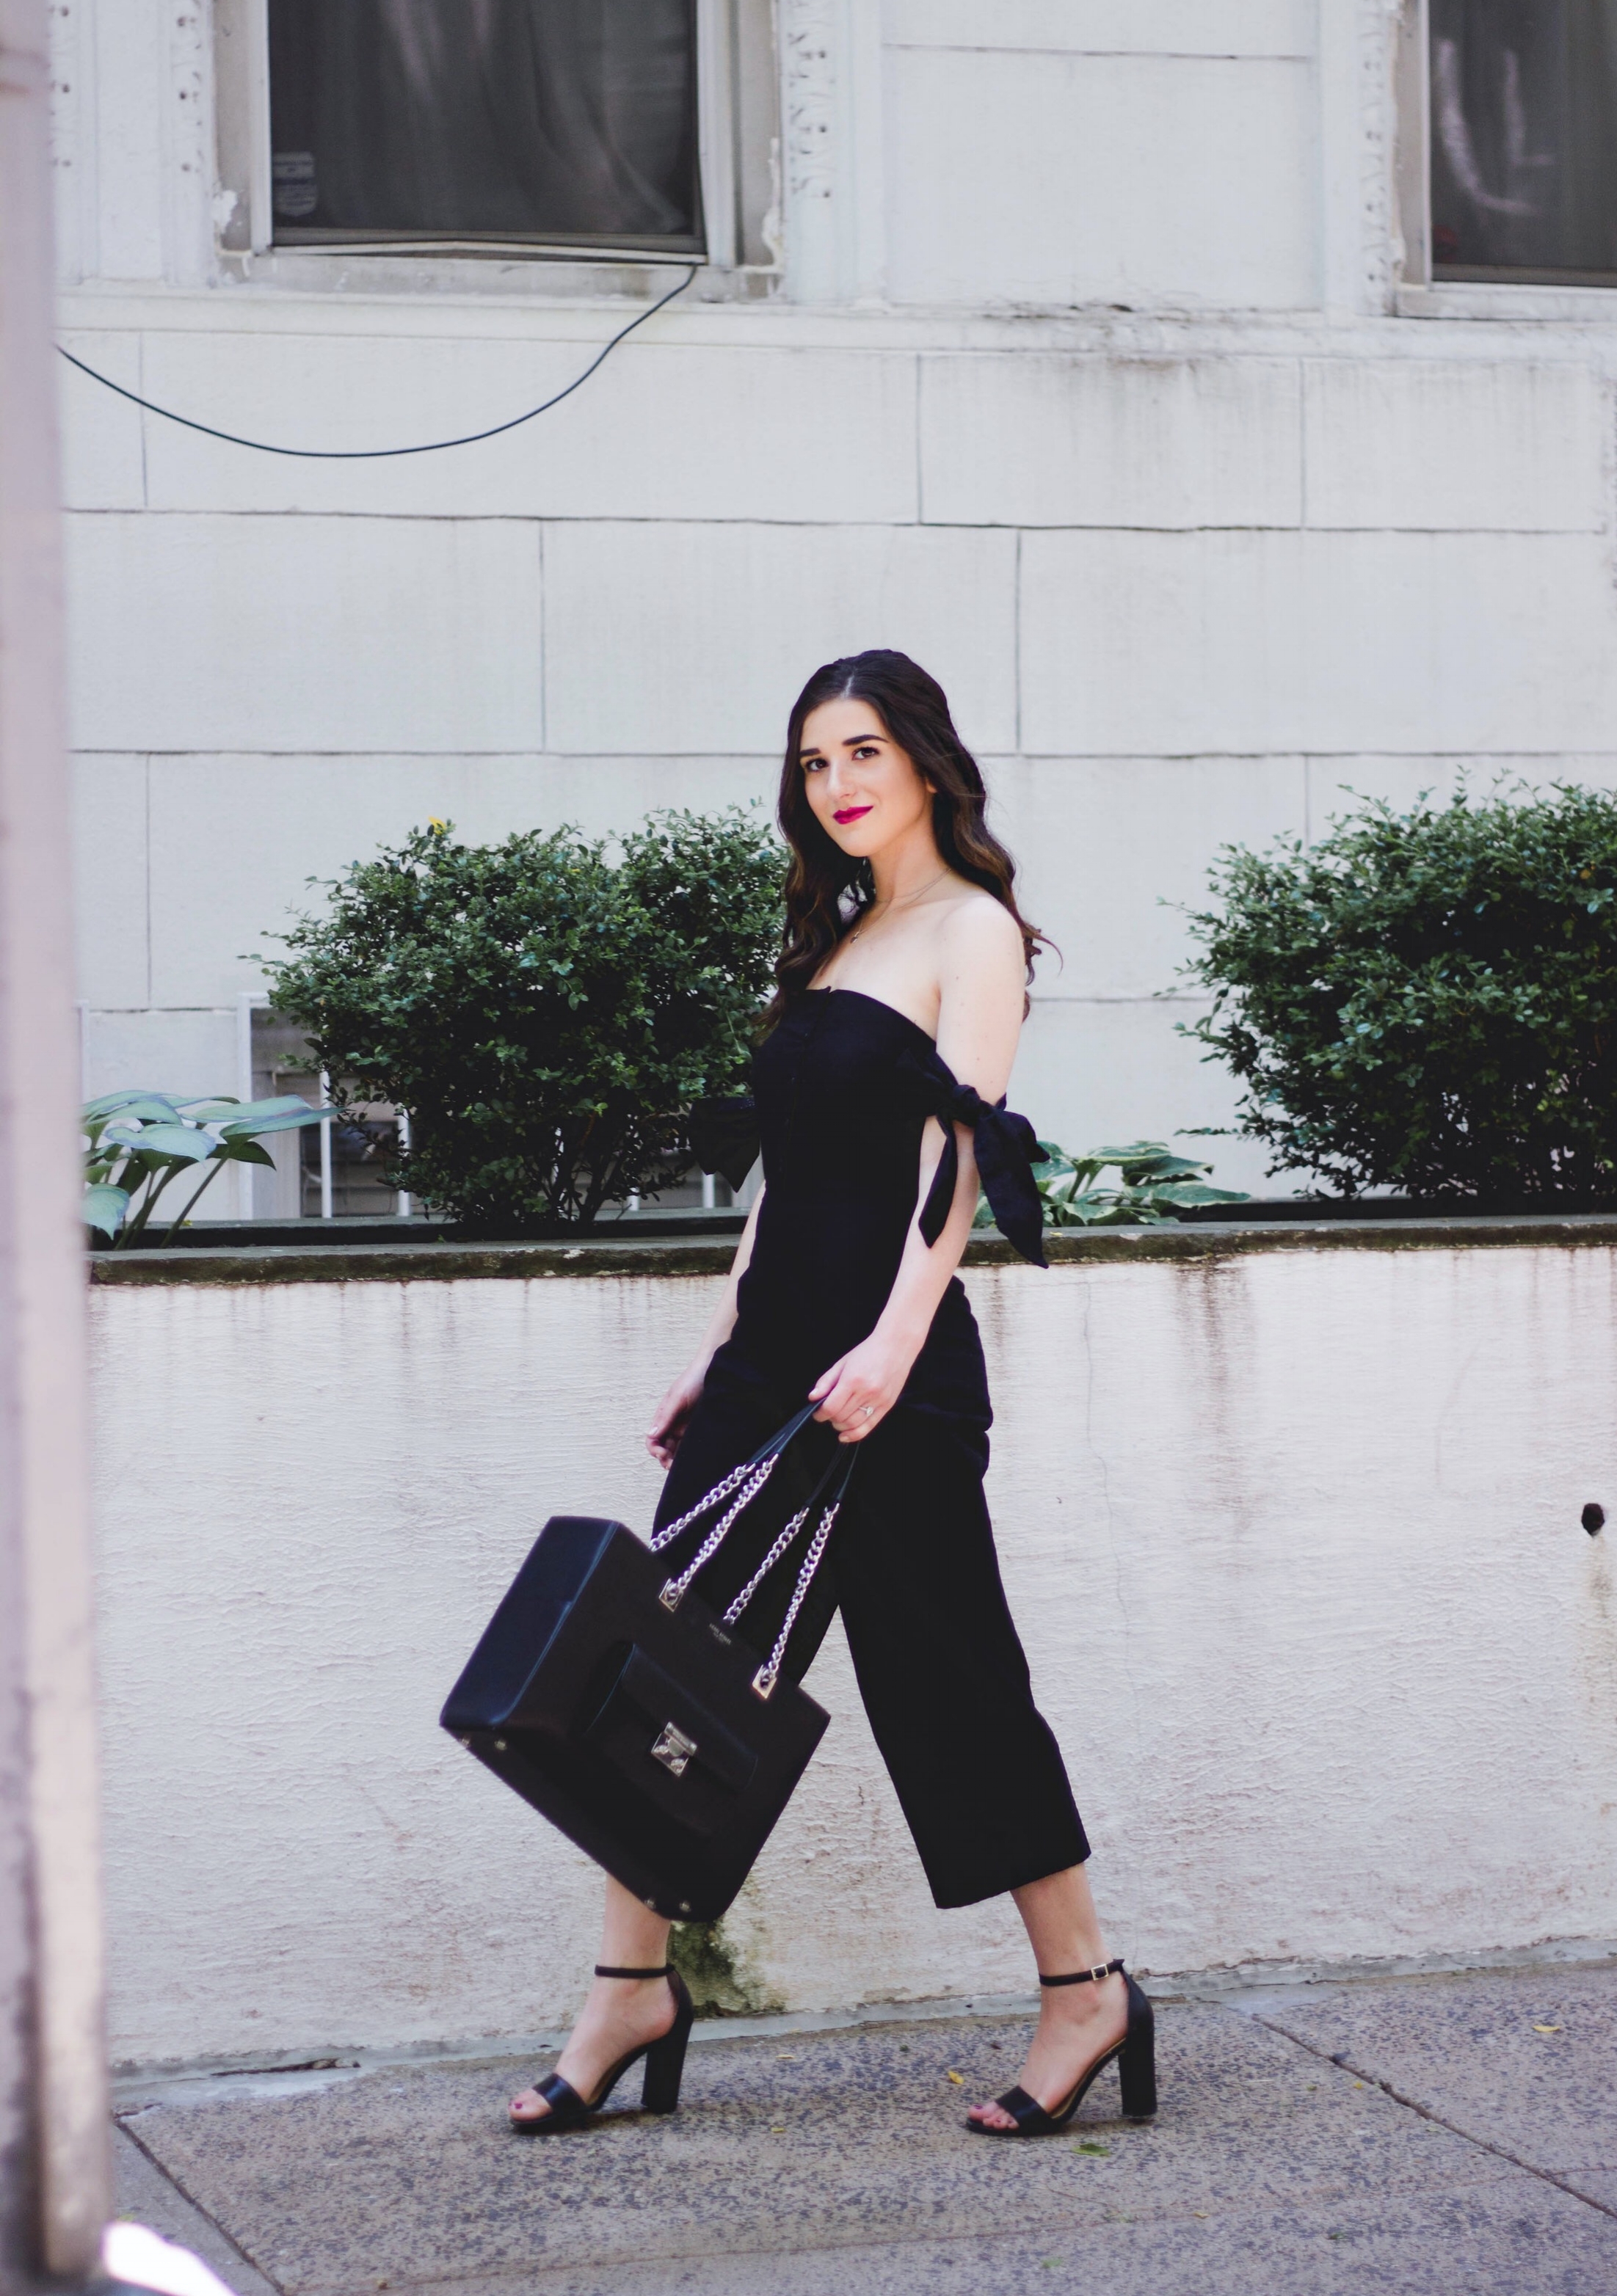 Black Asos Jumpsuit Prioritizing Life And Blog Esther Santer Fashion Blog NYC Street Style Blogger Outfit OOTD Trendy Monochrome Bag Purse Henri Bendel Beauty Model Photoshoot Shoes Wear Heels Sandals Open Toe  Hair Red Lips Pretty Summer Pants Girl.JPG